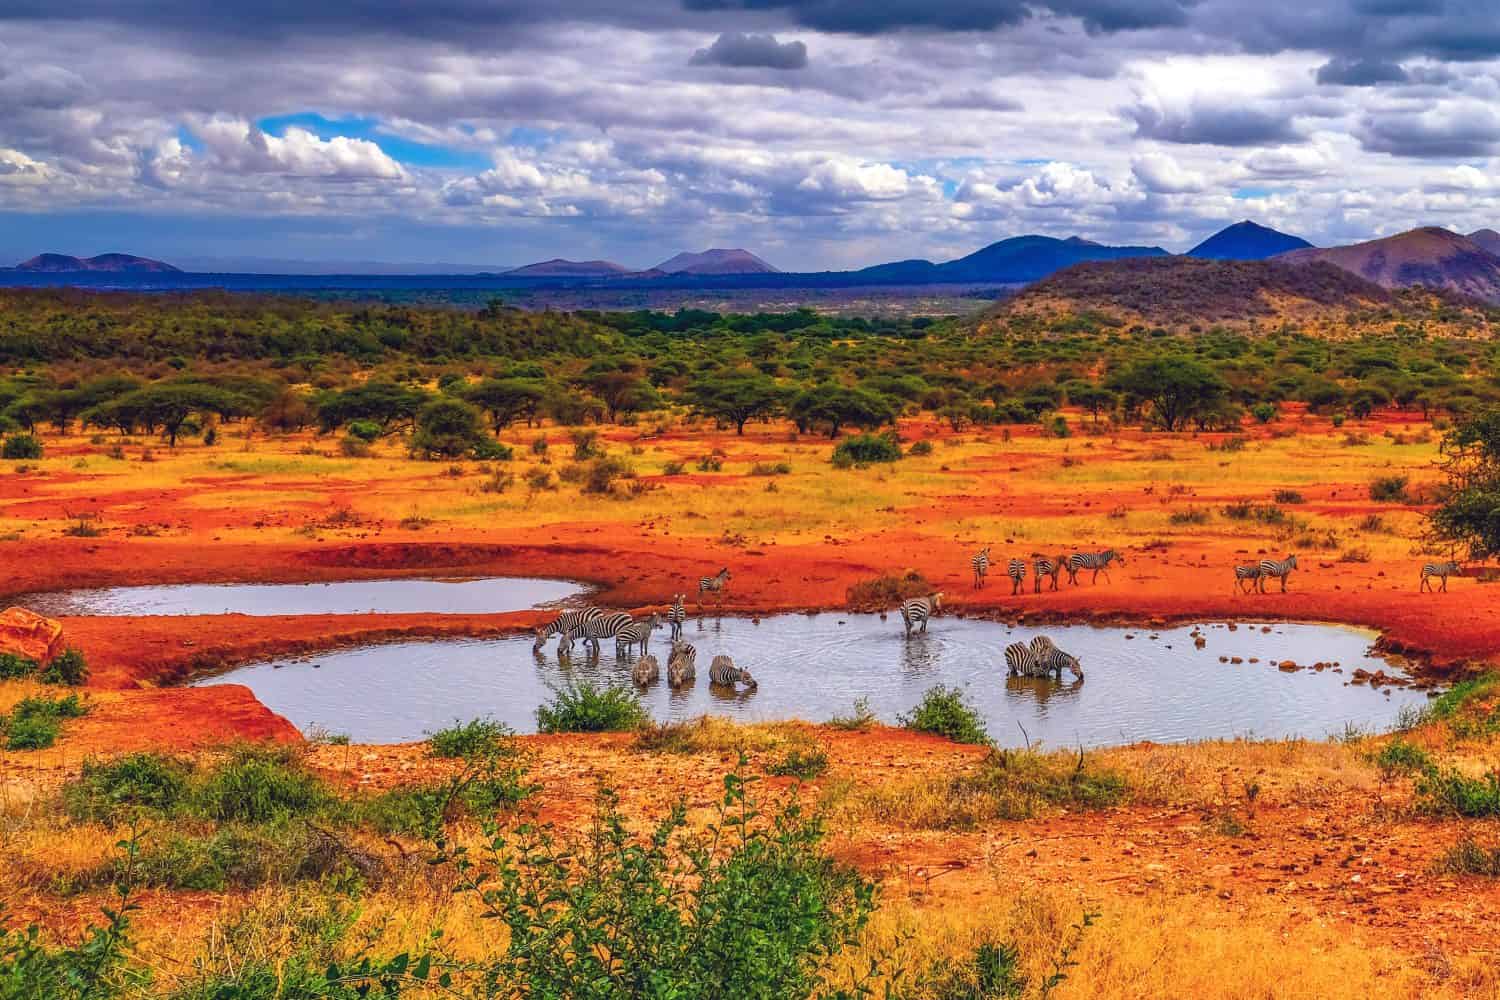 Zebras drinking in watering hole, volcanic landscape of Tsavo West National Park